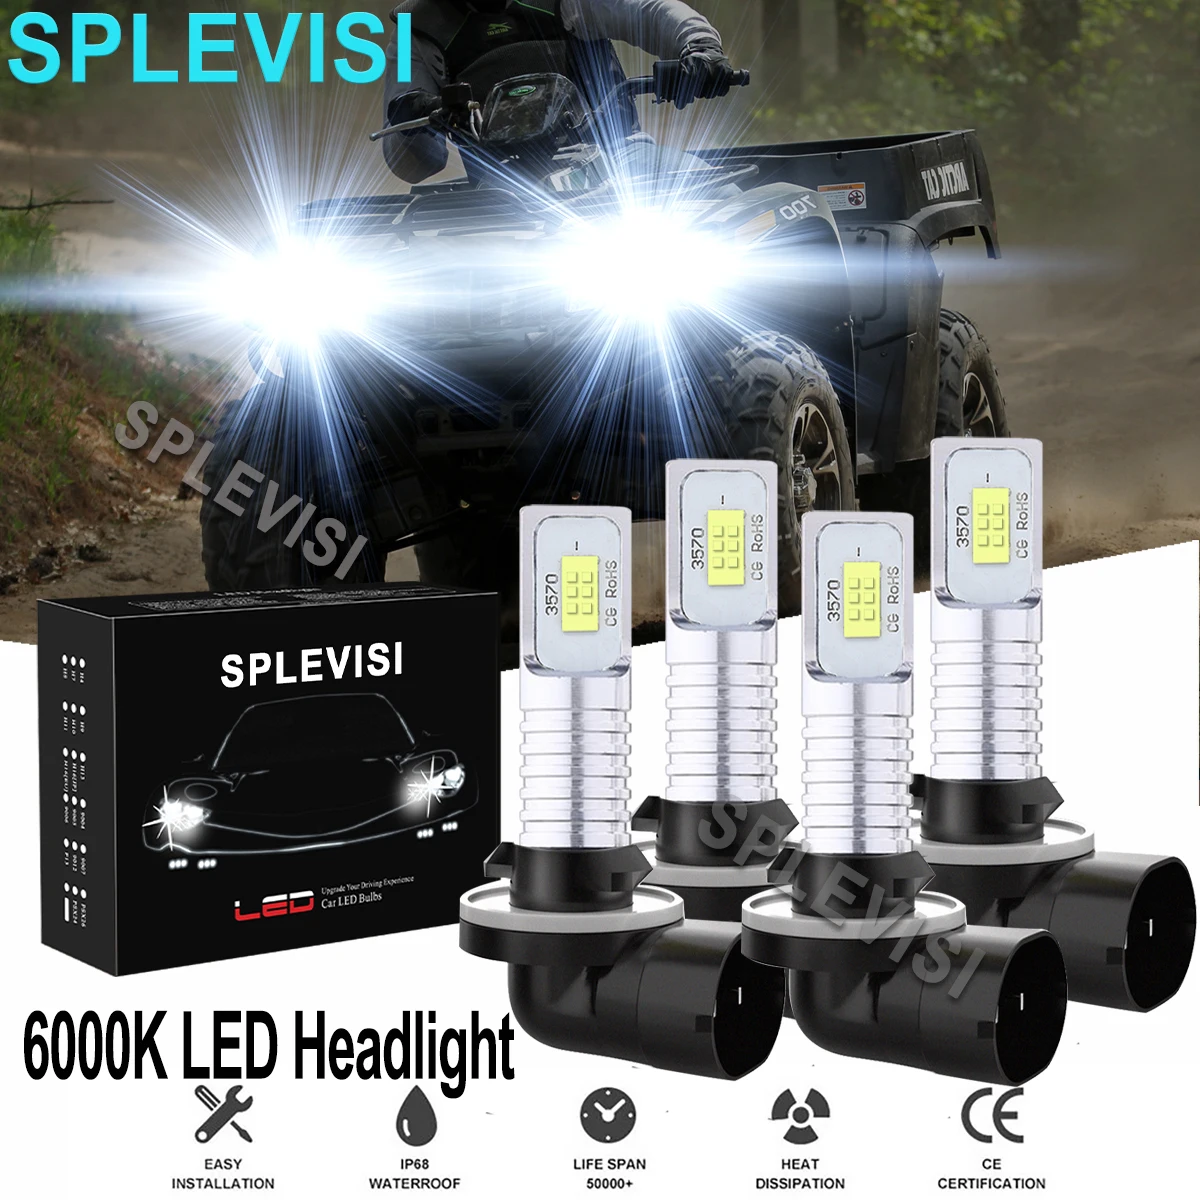 4x 140W 6000K Pure White LED Headlight Bulbs Kit  For ARCTIC CAT 400 500 650 700 HIGH LOW BEAM motorcycle headlight bulbs h6 ba20d hi lo beam moto led headlight motorbike led 1400lm lamps scooter conversion kit bulbs 6000k